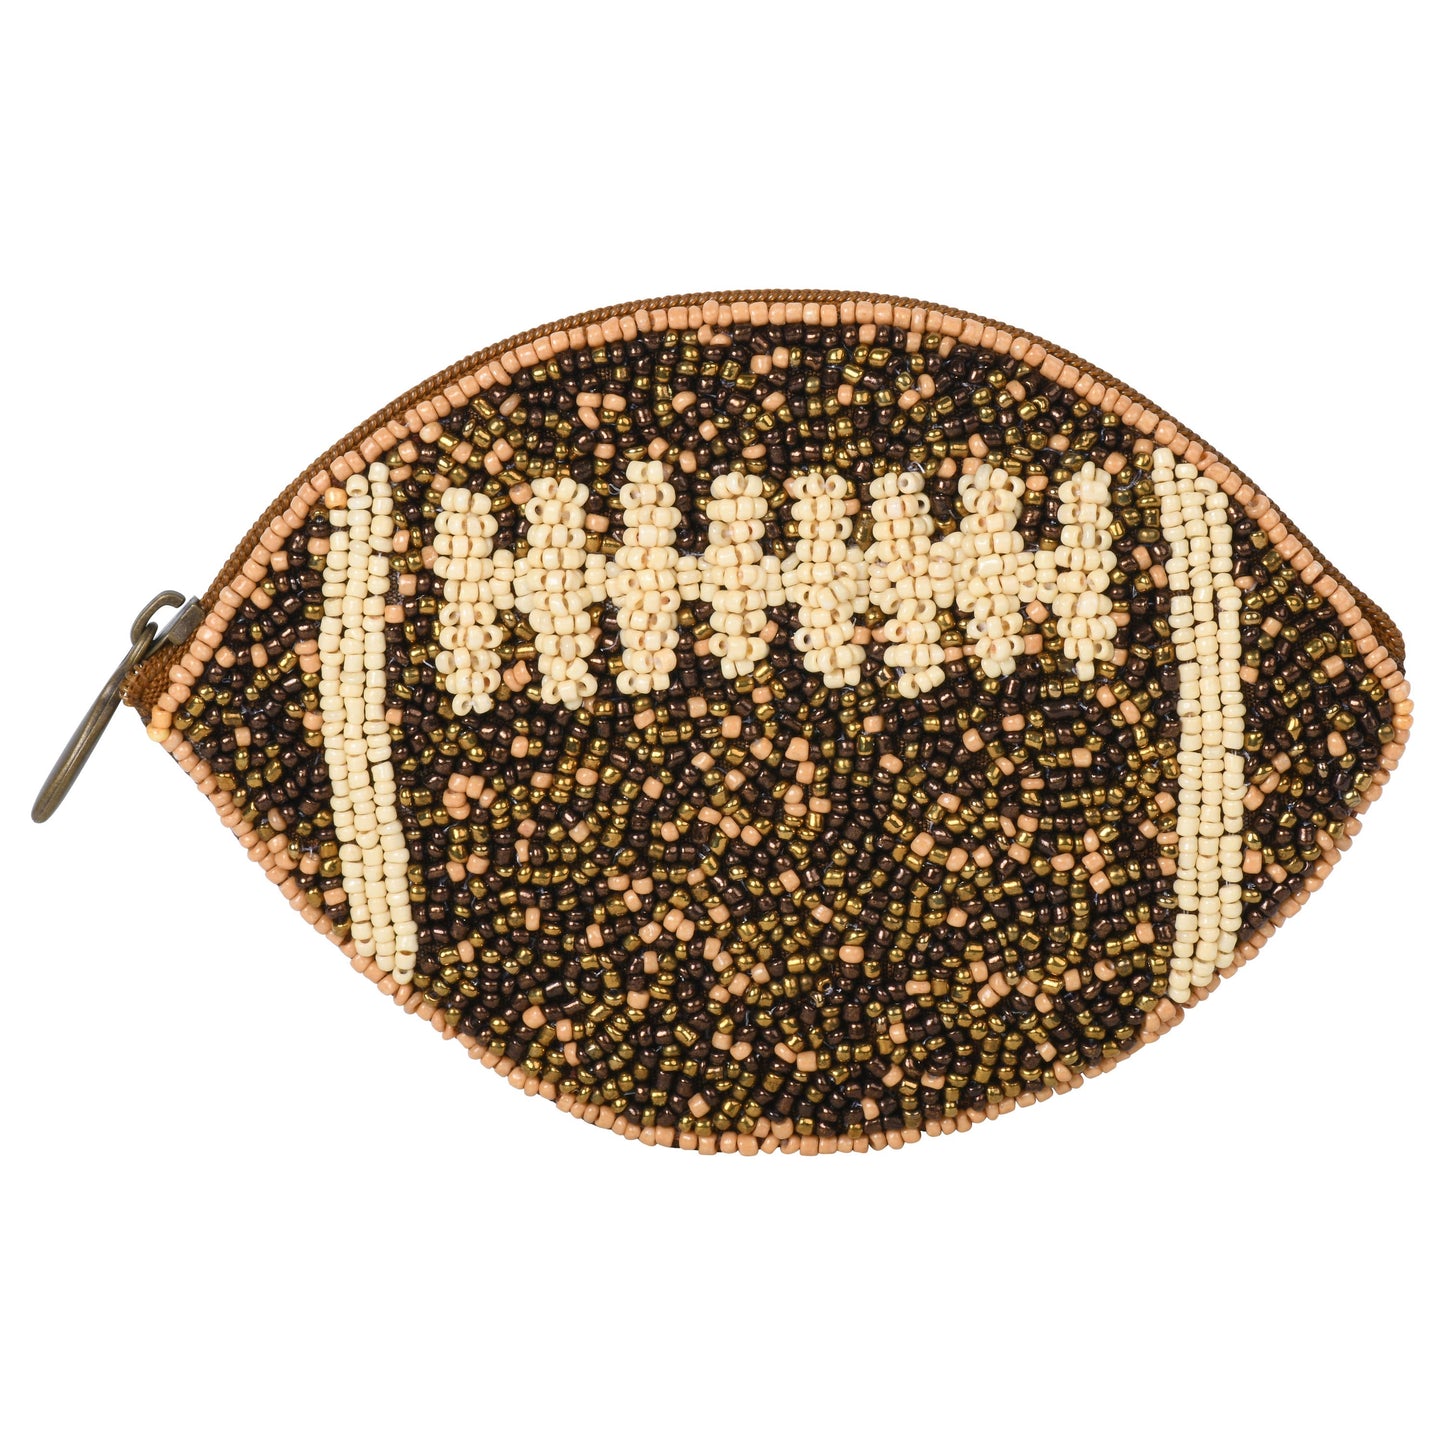 Bamboo Trading Company - Essential Pouch Football